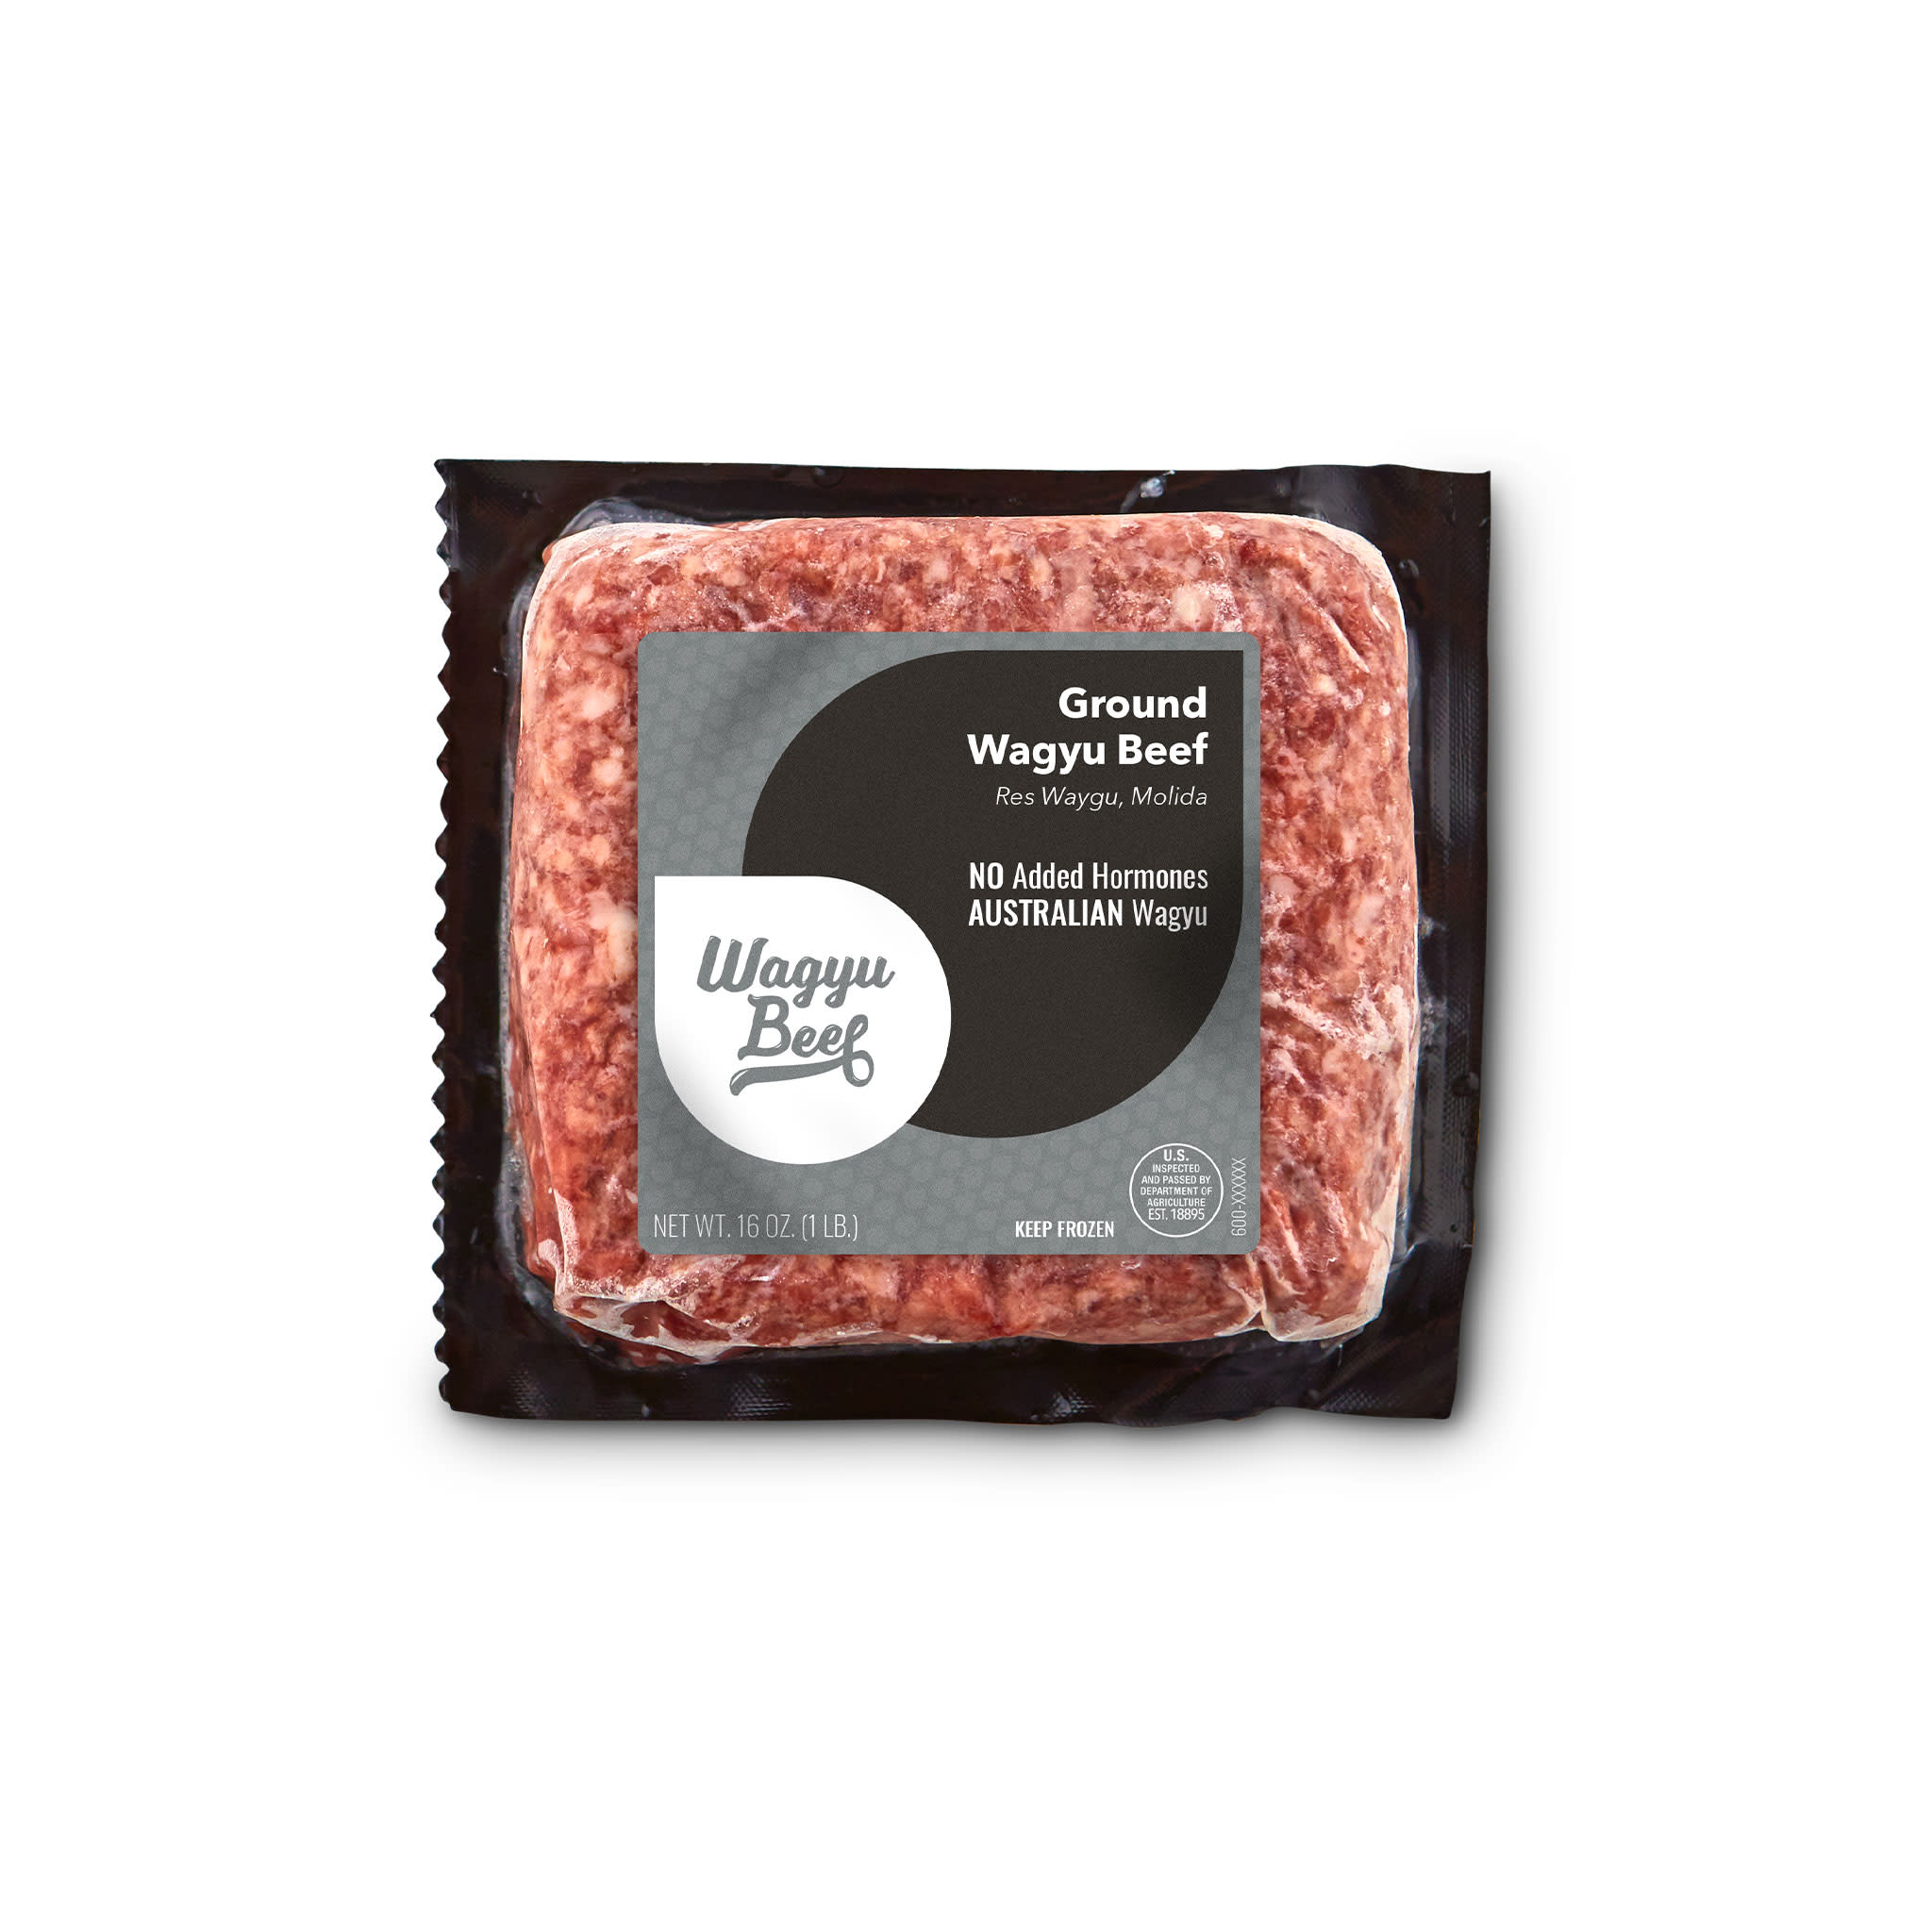 2618 WF PACKAGED Ground Wagyu Beef 80- Lean - 1 LB Beef